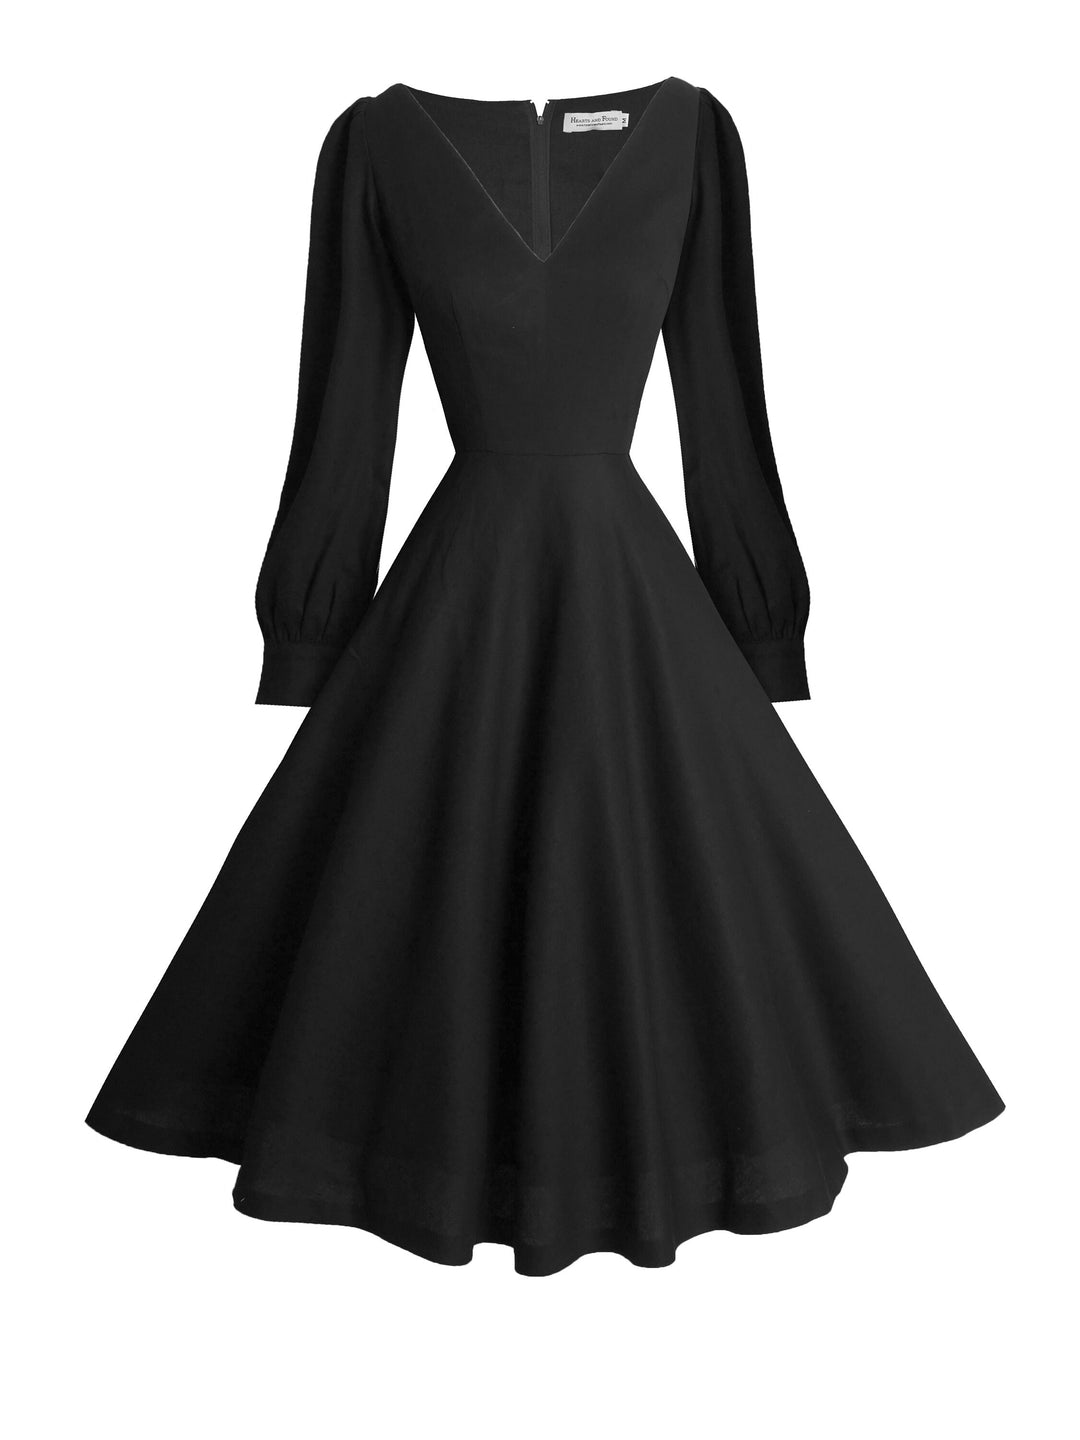 RTS - Size S - Donna Dress in Raven Black Cotton